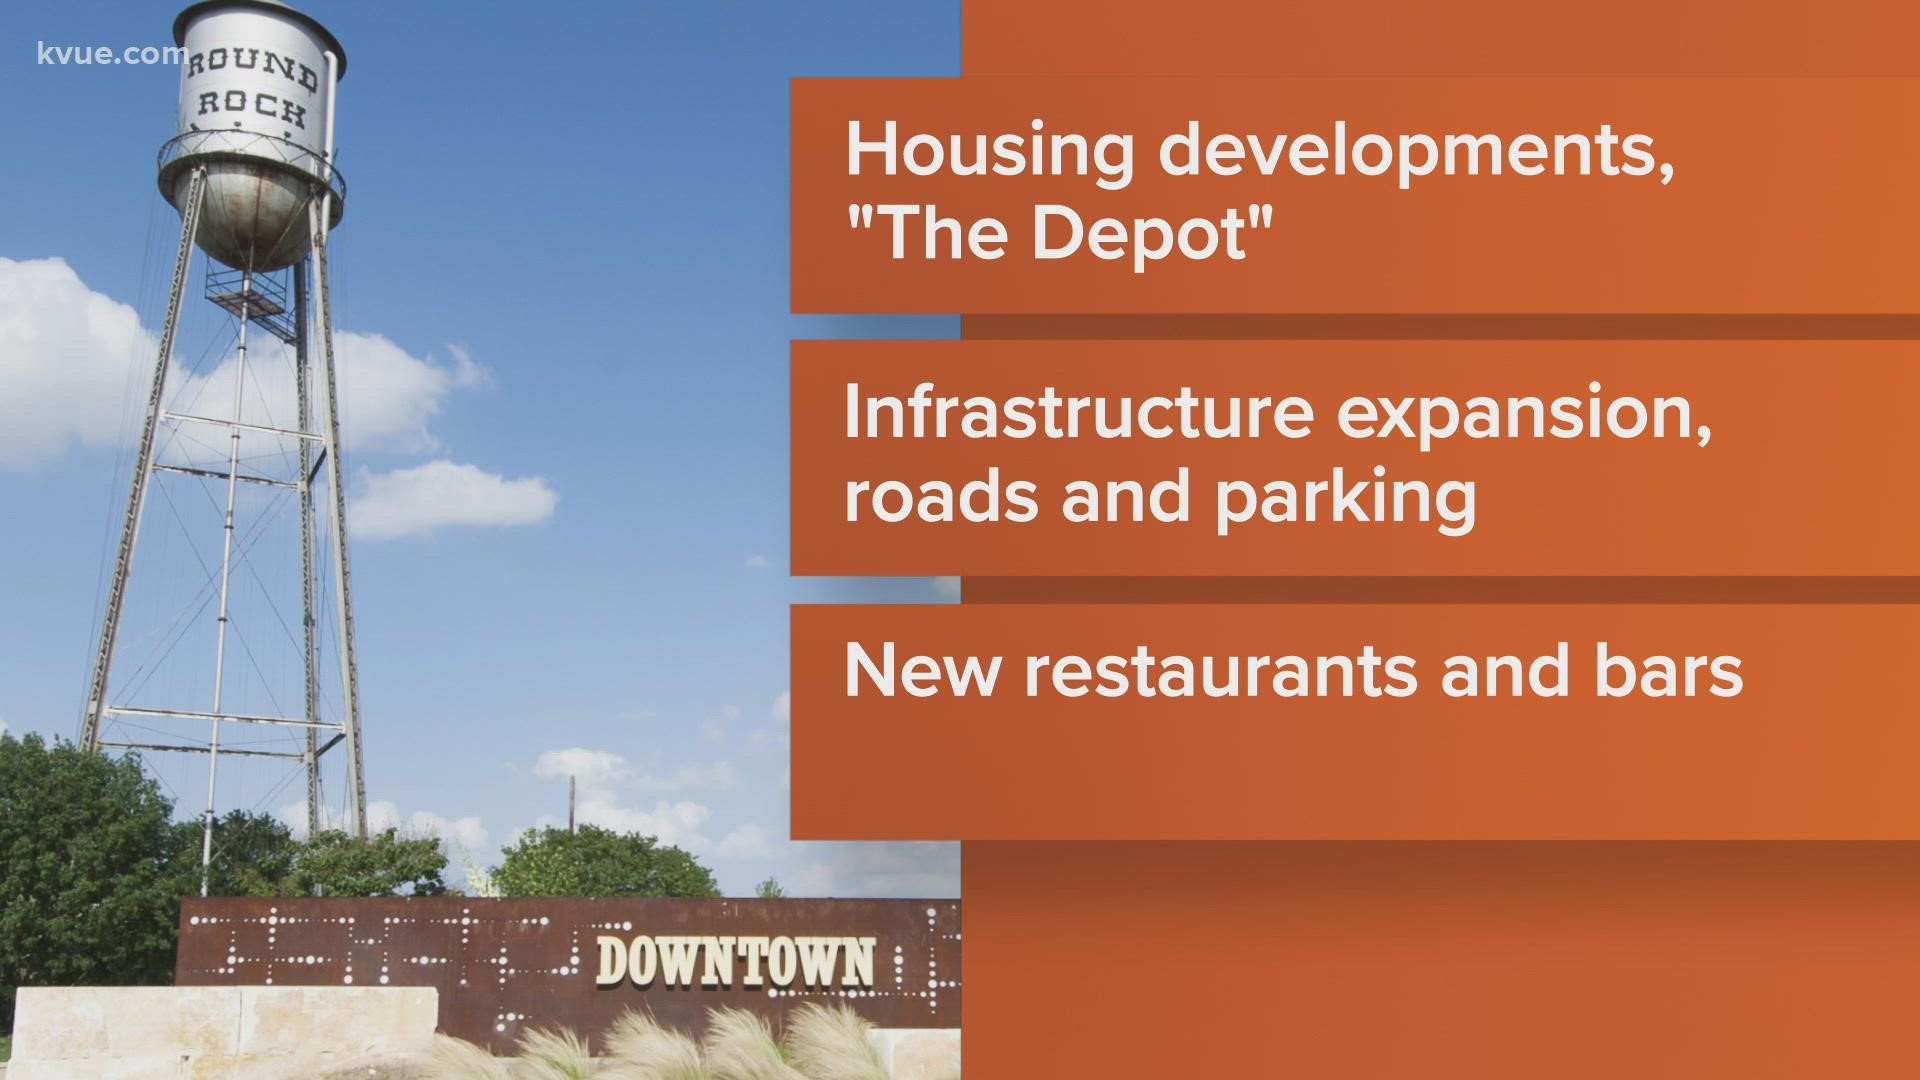 We're checking in with three Central Texas cities to see how they're modernizing their downtown areas.